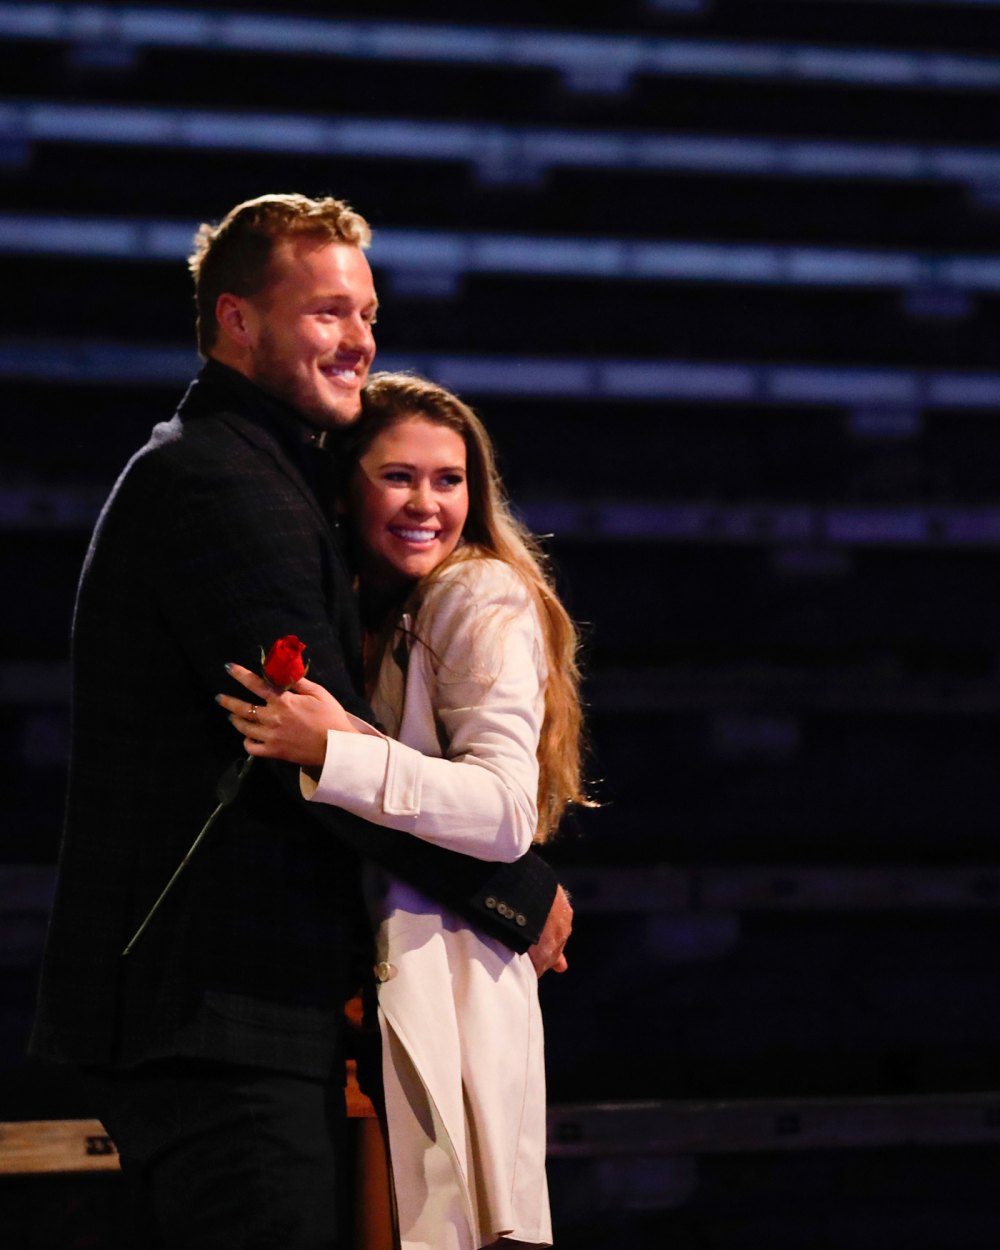 Colton Underwood Rooting for Ex Caelynn to Find a Man